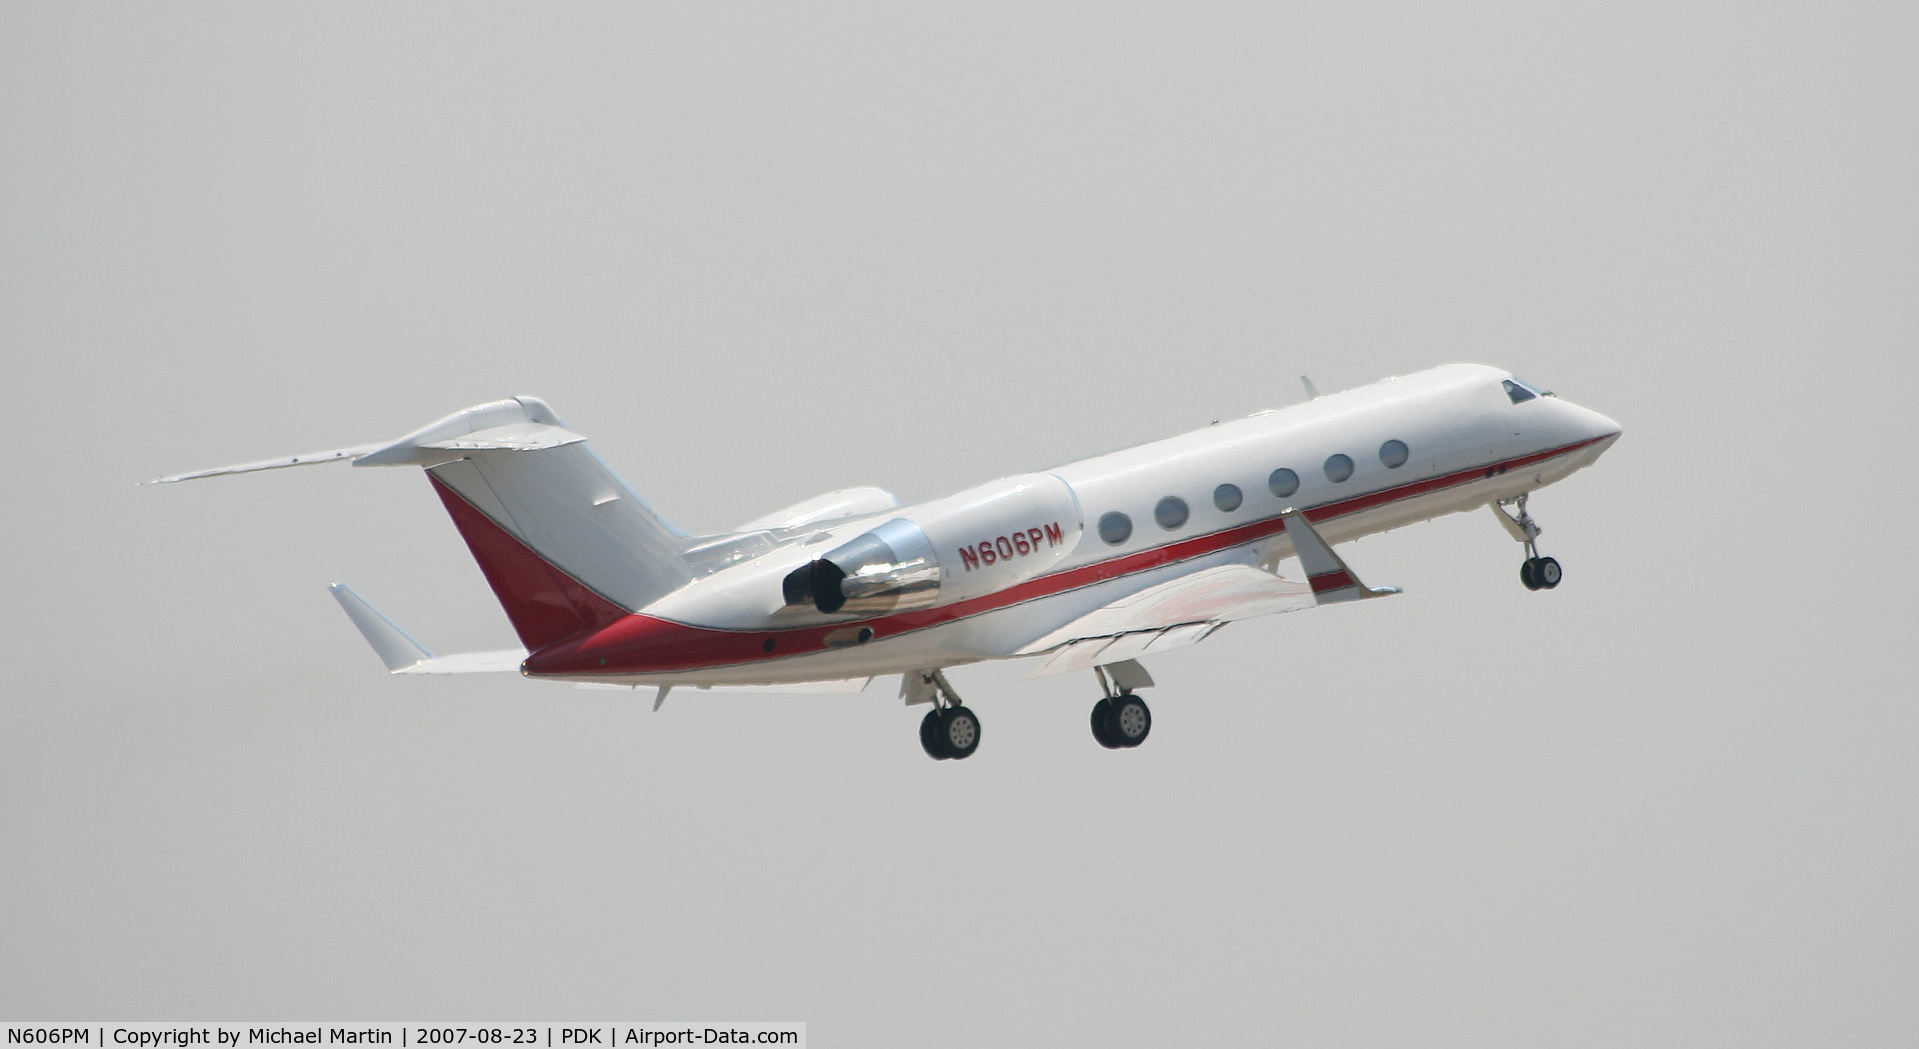 N606PM, 2003 Gulfstream Aerospace G-IV C/N 1512, Don't let the ownership fool you - it's cigarette manufacturer Phillip Morris